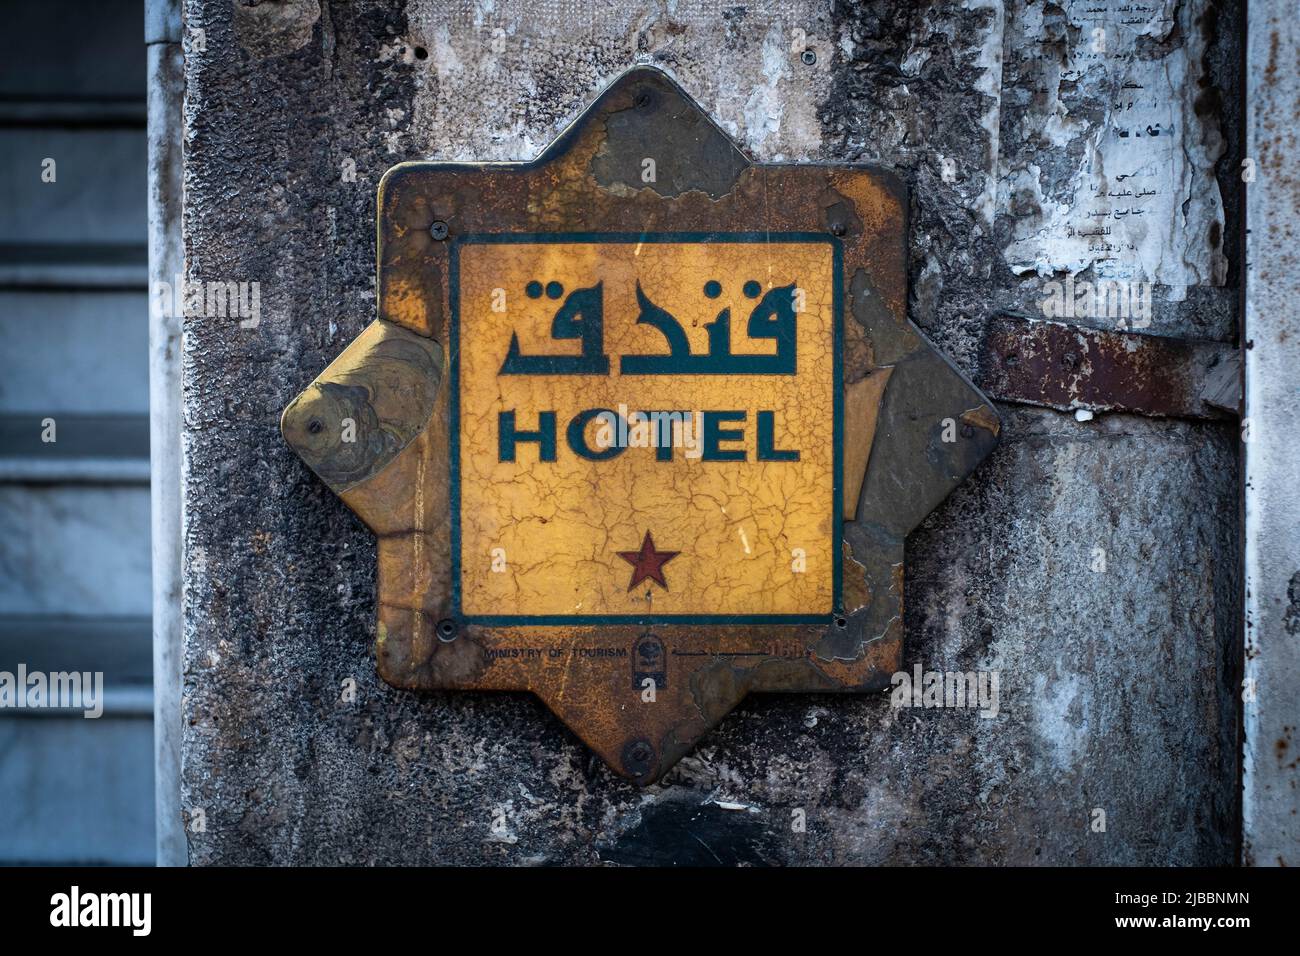 Damascus, Syria - May, 2022: Vintage hotel sign from the ministry of tourism in Damascus, Syria Stock Photo